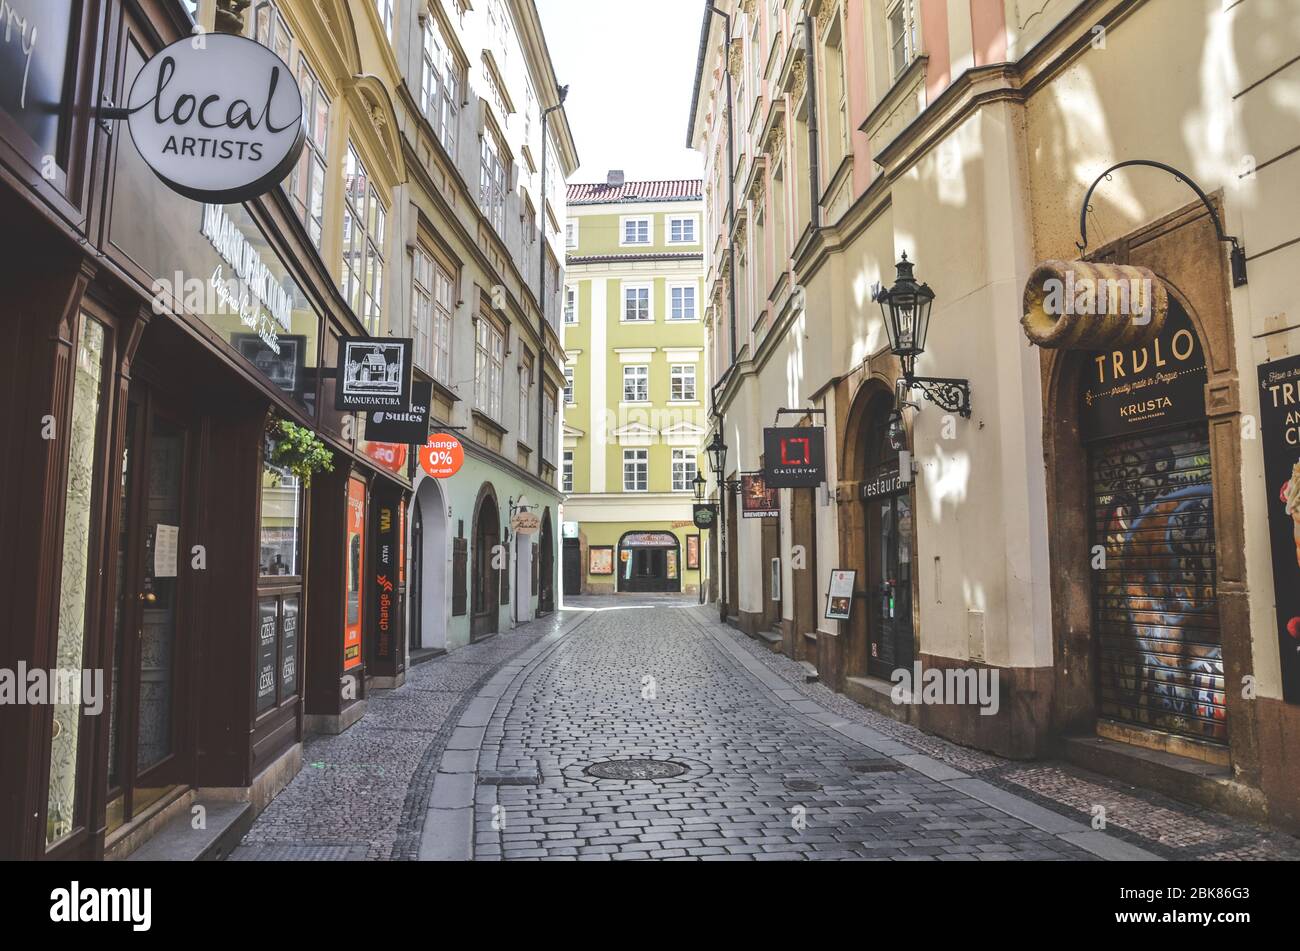 Prague, Czech Republic - April 23, 2020: Empty street in the historical center of the Czech capital. Closed shops and restaurants due to coronavirus outbreak. Empty city, COVID-19 pandemic. Stock Photo